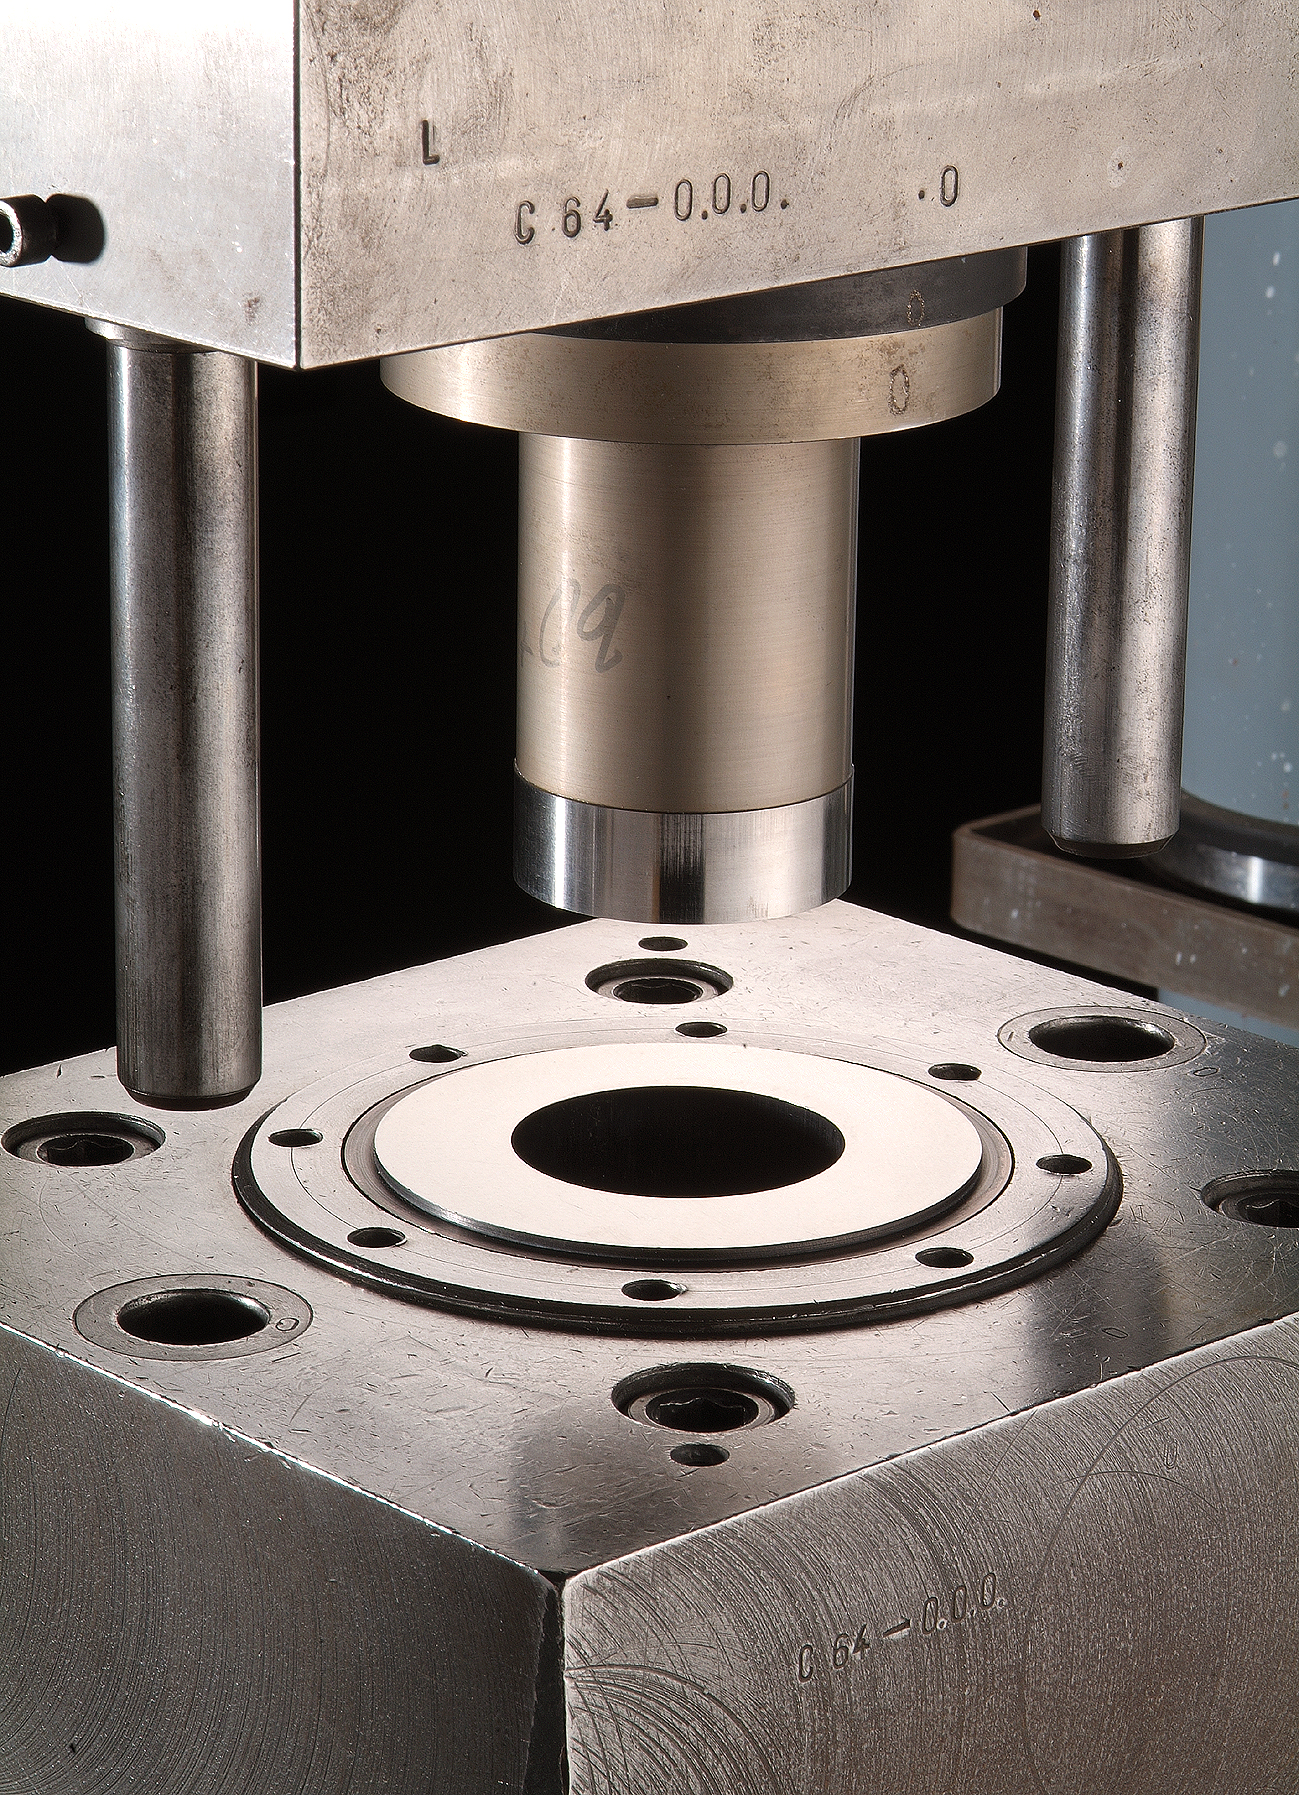 Press with tool for toroidal cores